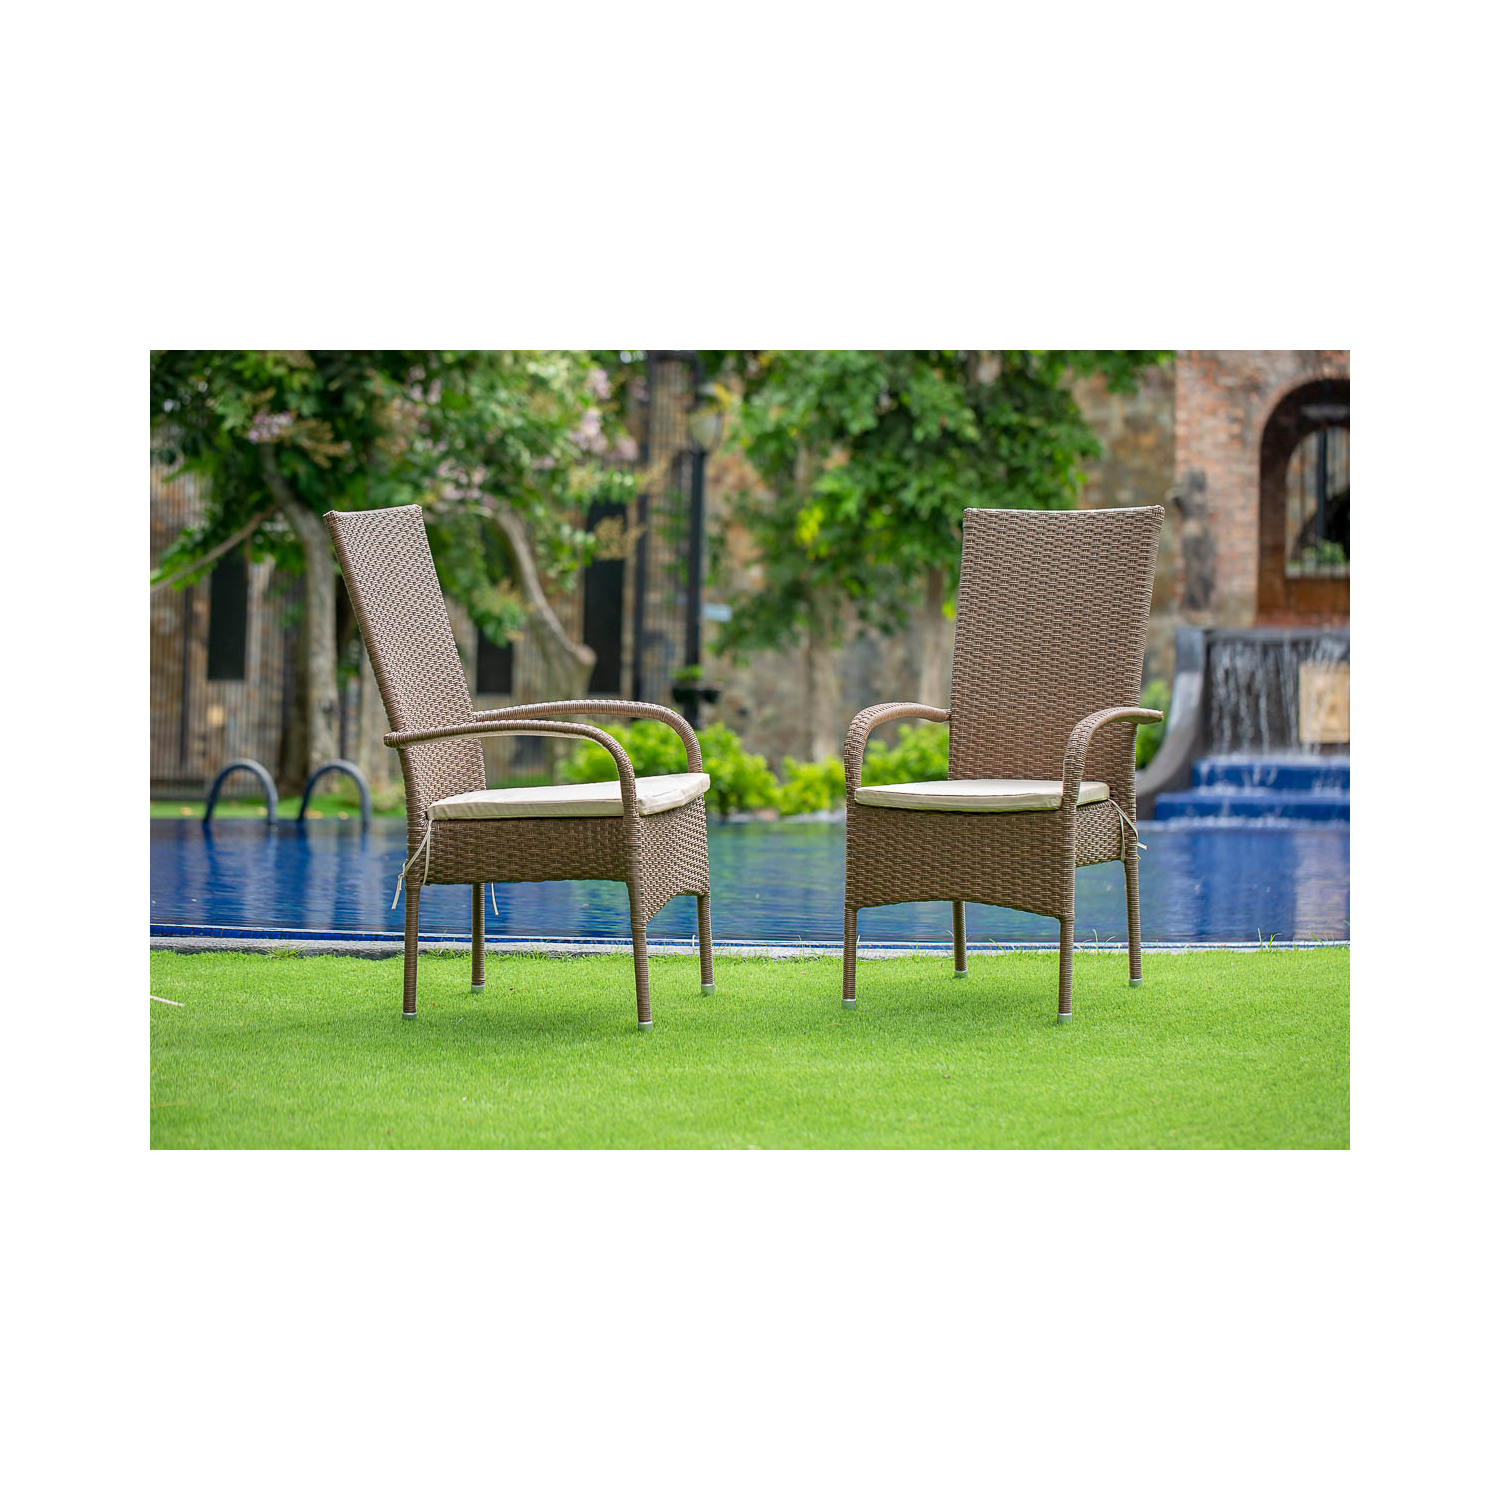 Set of 2 Chairs OSLC102A OSLO PATIO CHAIR WITH CUSHION, BROWN WICKER, AND BEIGE CUSHION - image 1 of 3